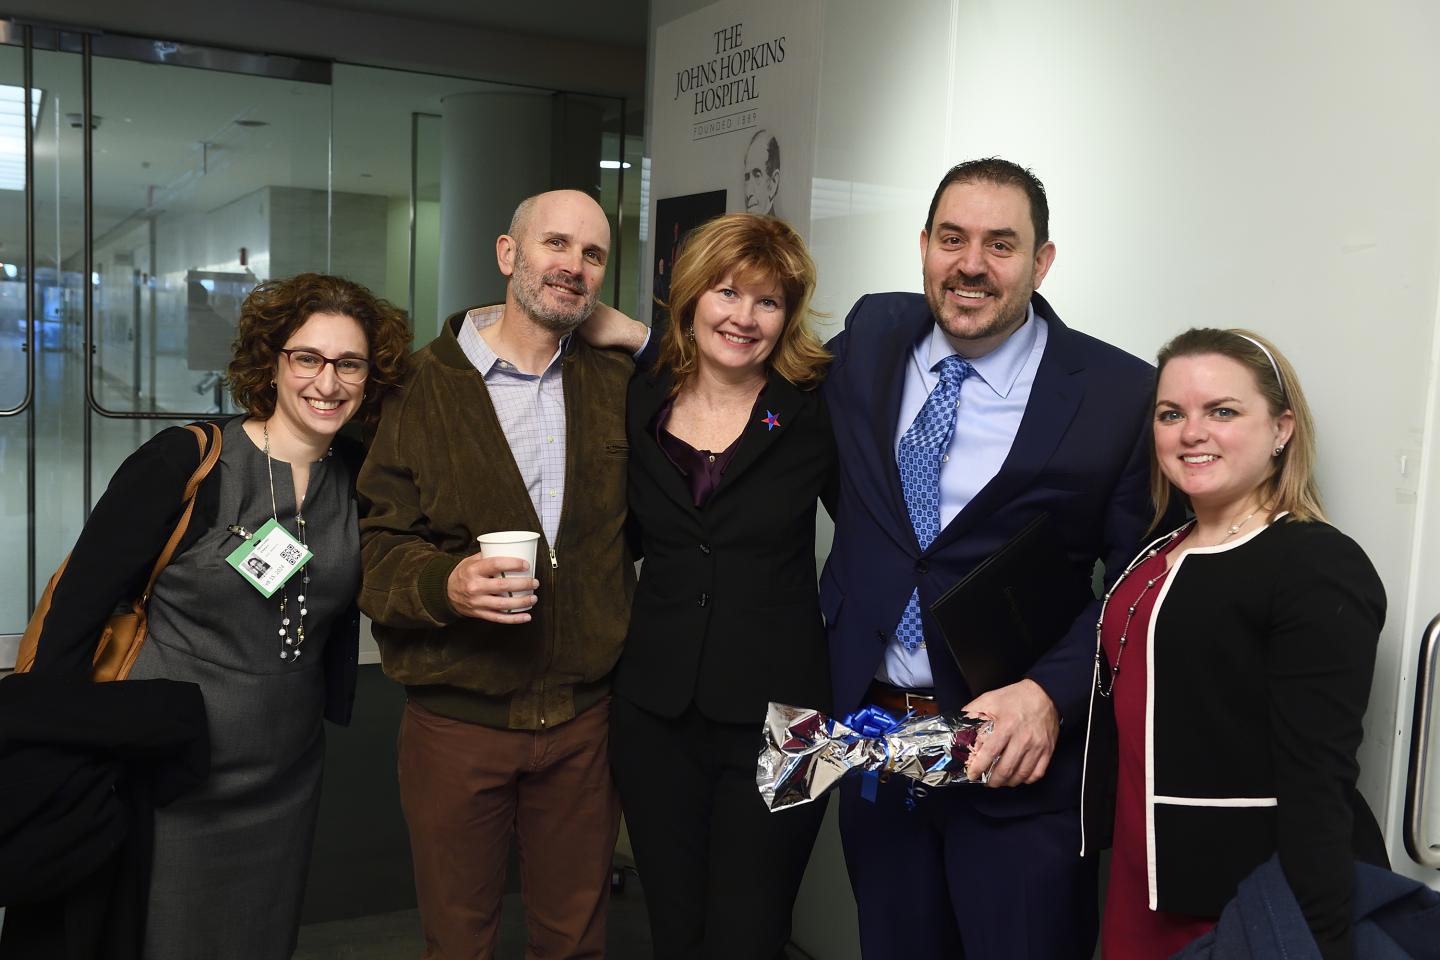 Joseph Sakran celebrates with colleagues after receiving the President's Frontier Award